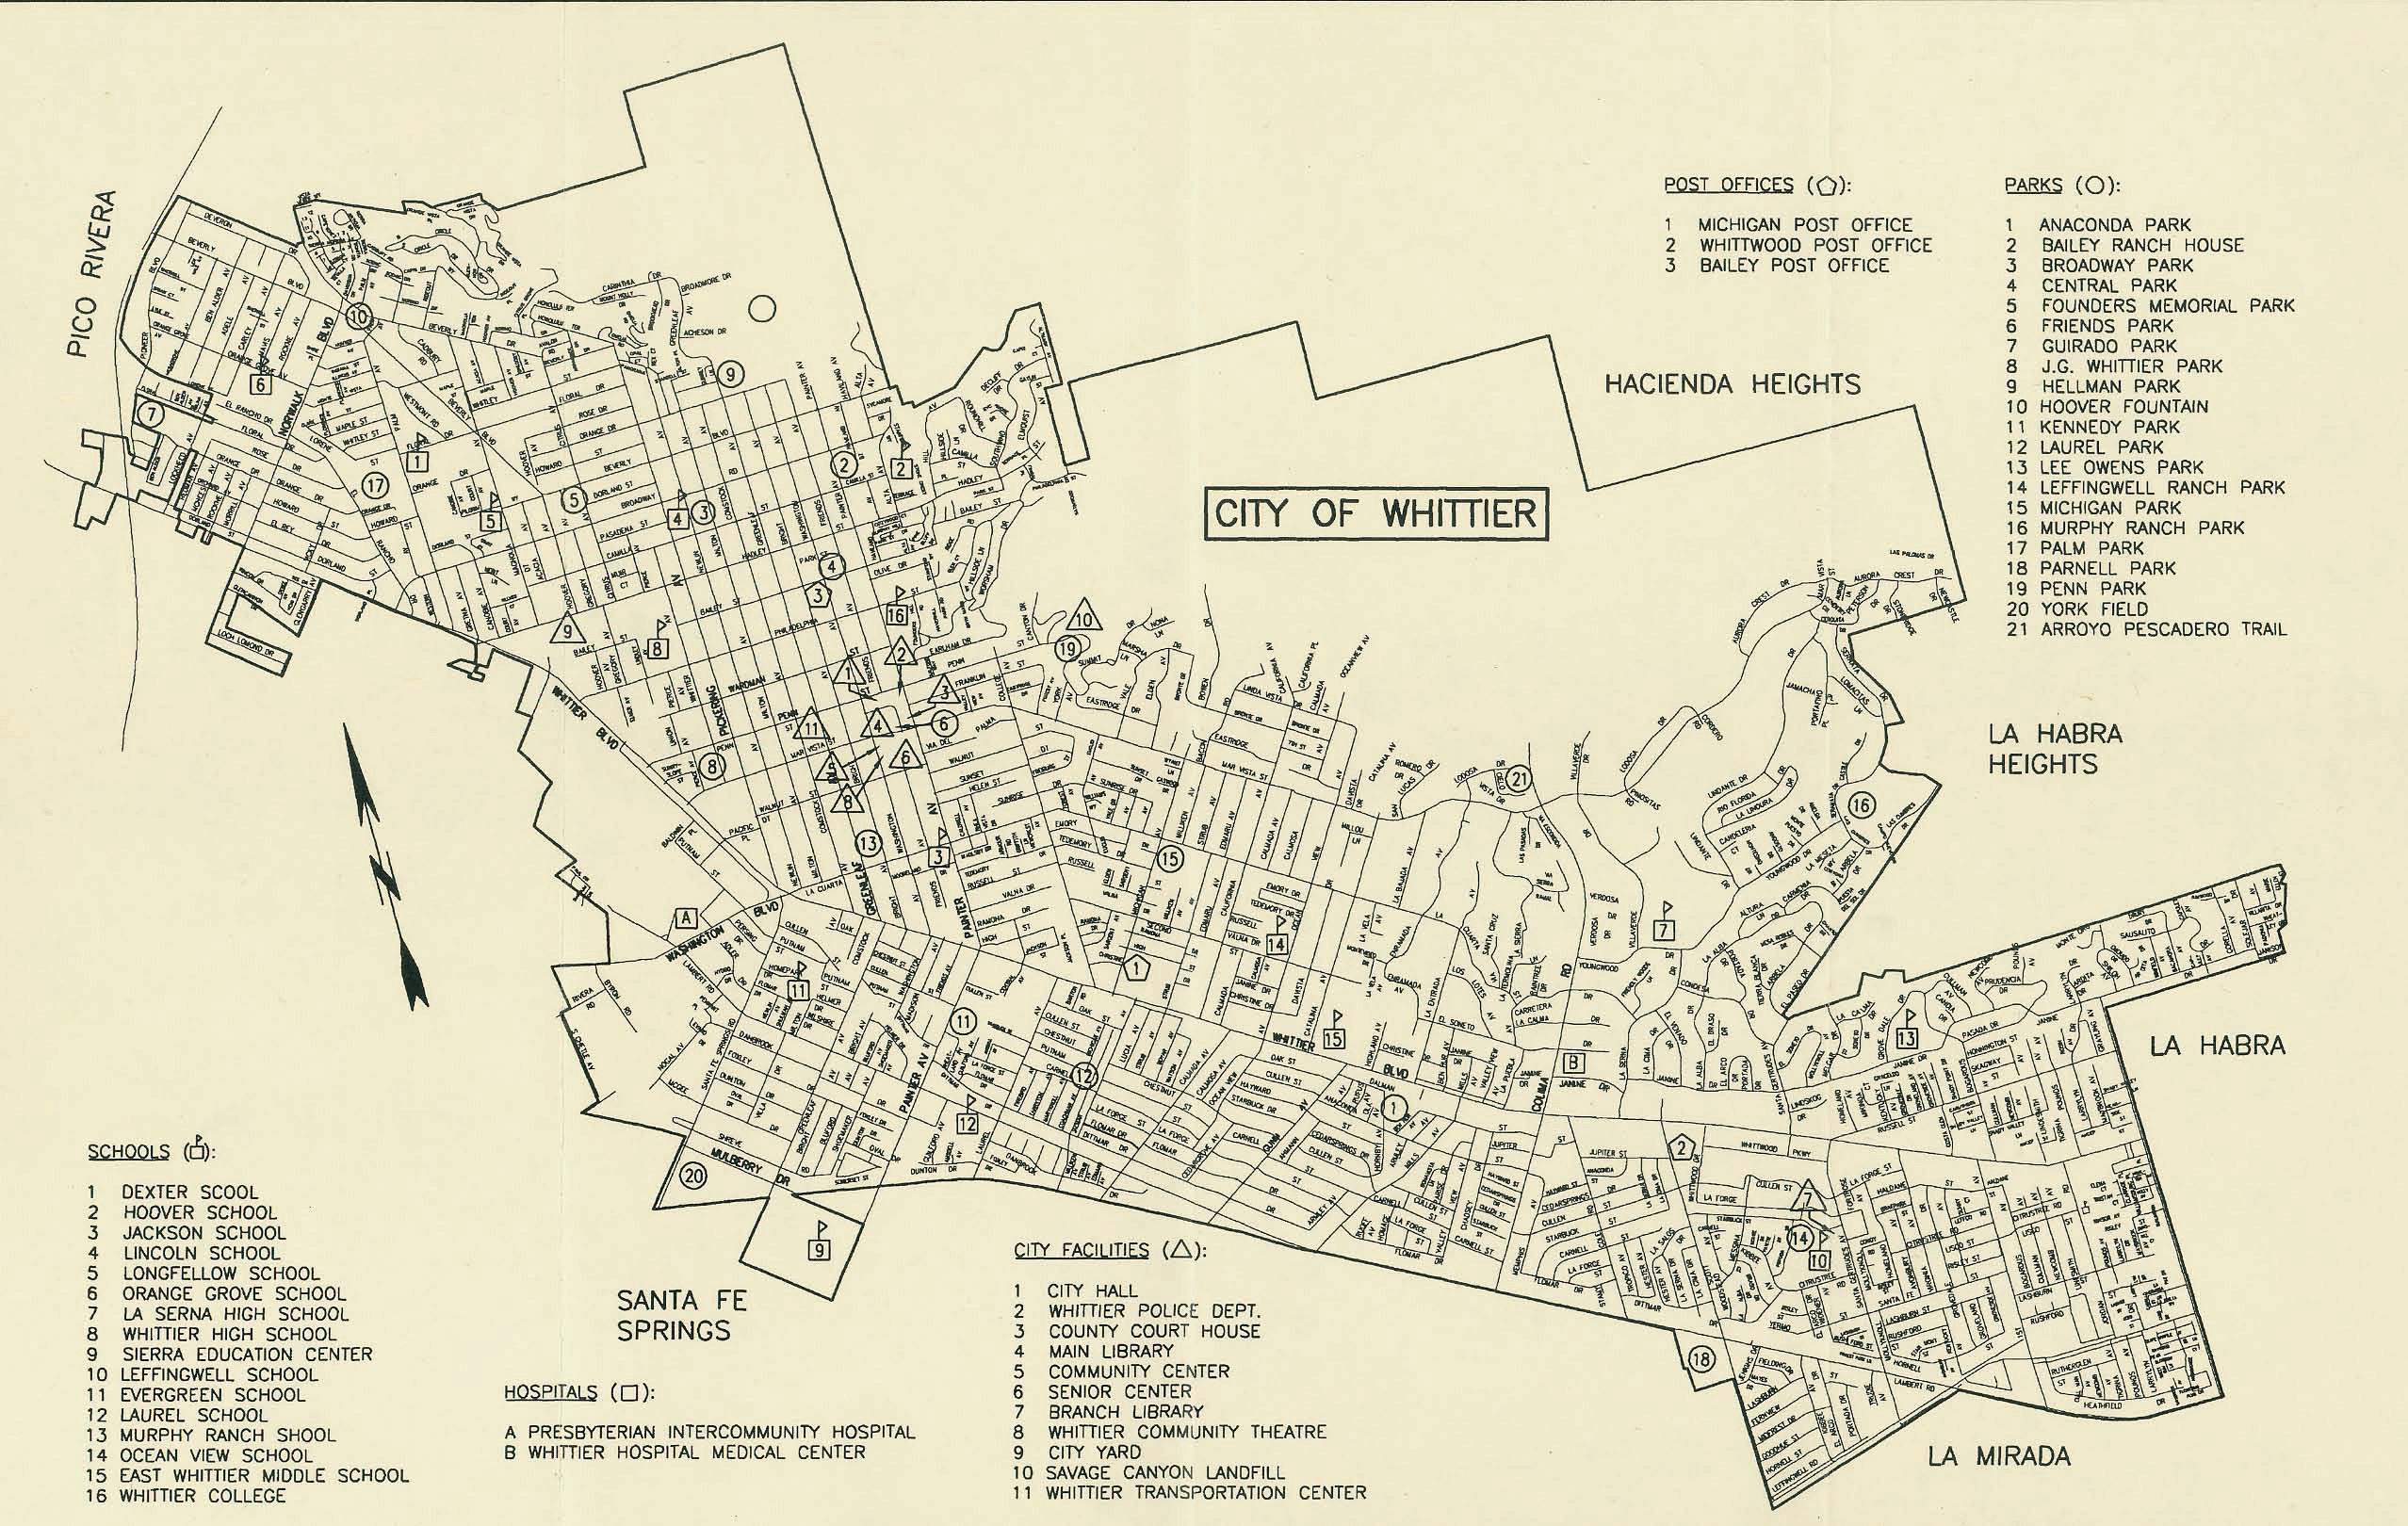 Map of the City of Whittier circa 1990.  Legend shows schools, city facilities, and parks.